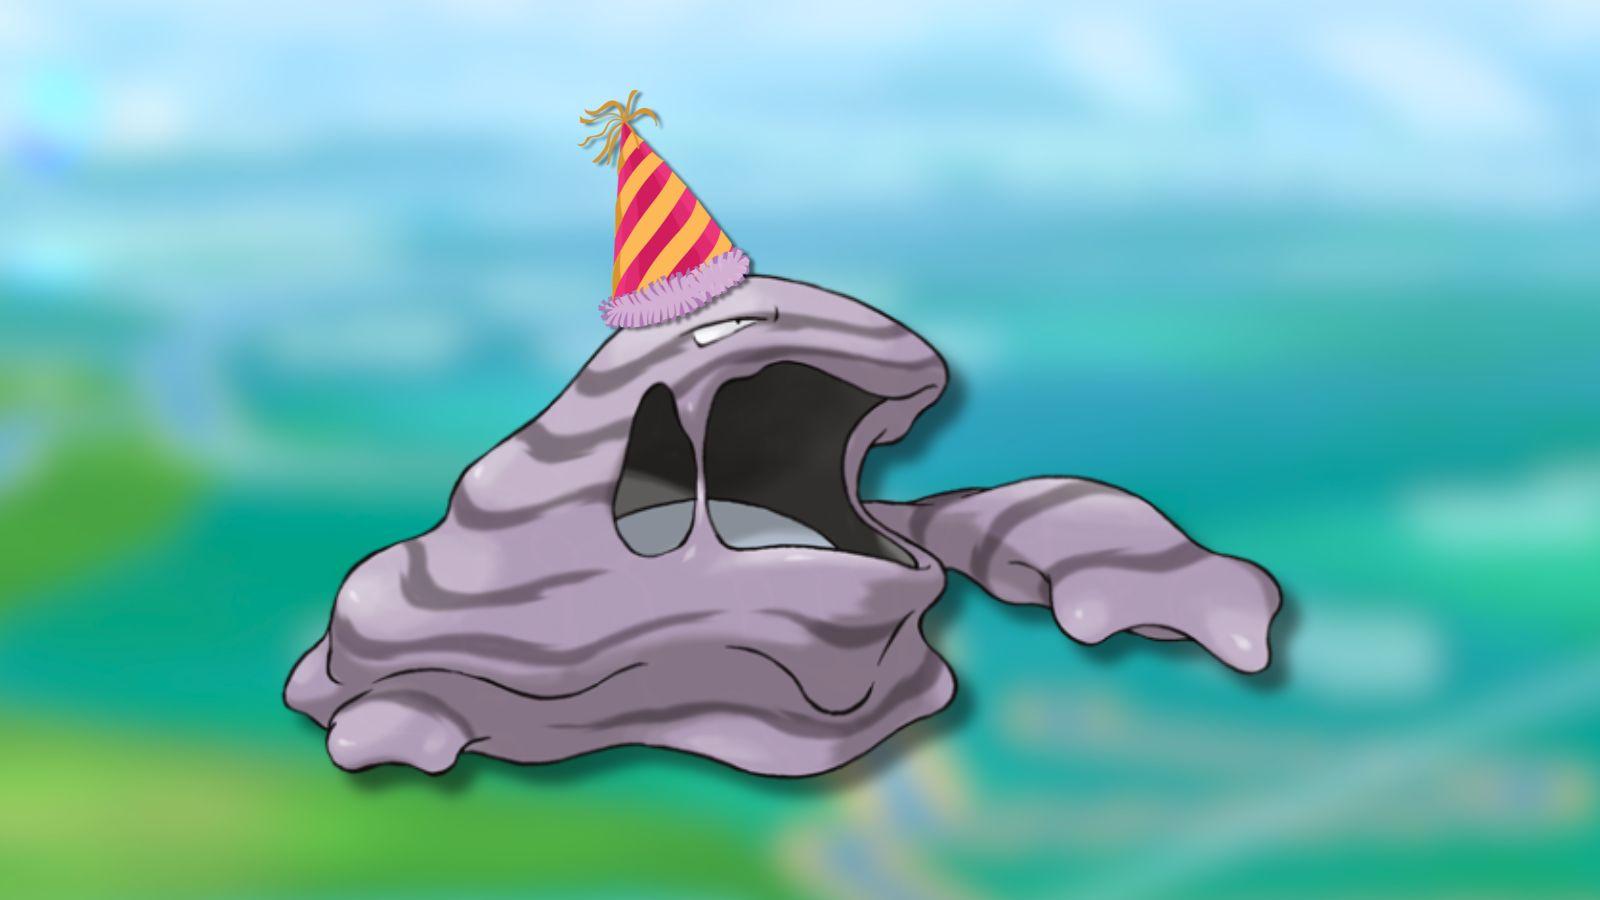 Muk Pokemon with party hat and Pokemon Go background.